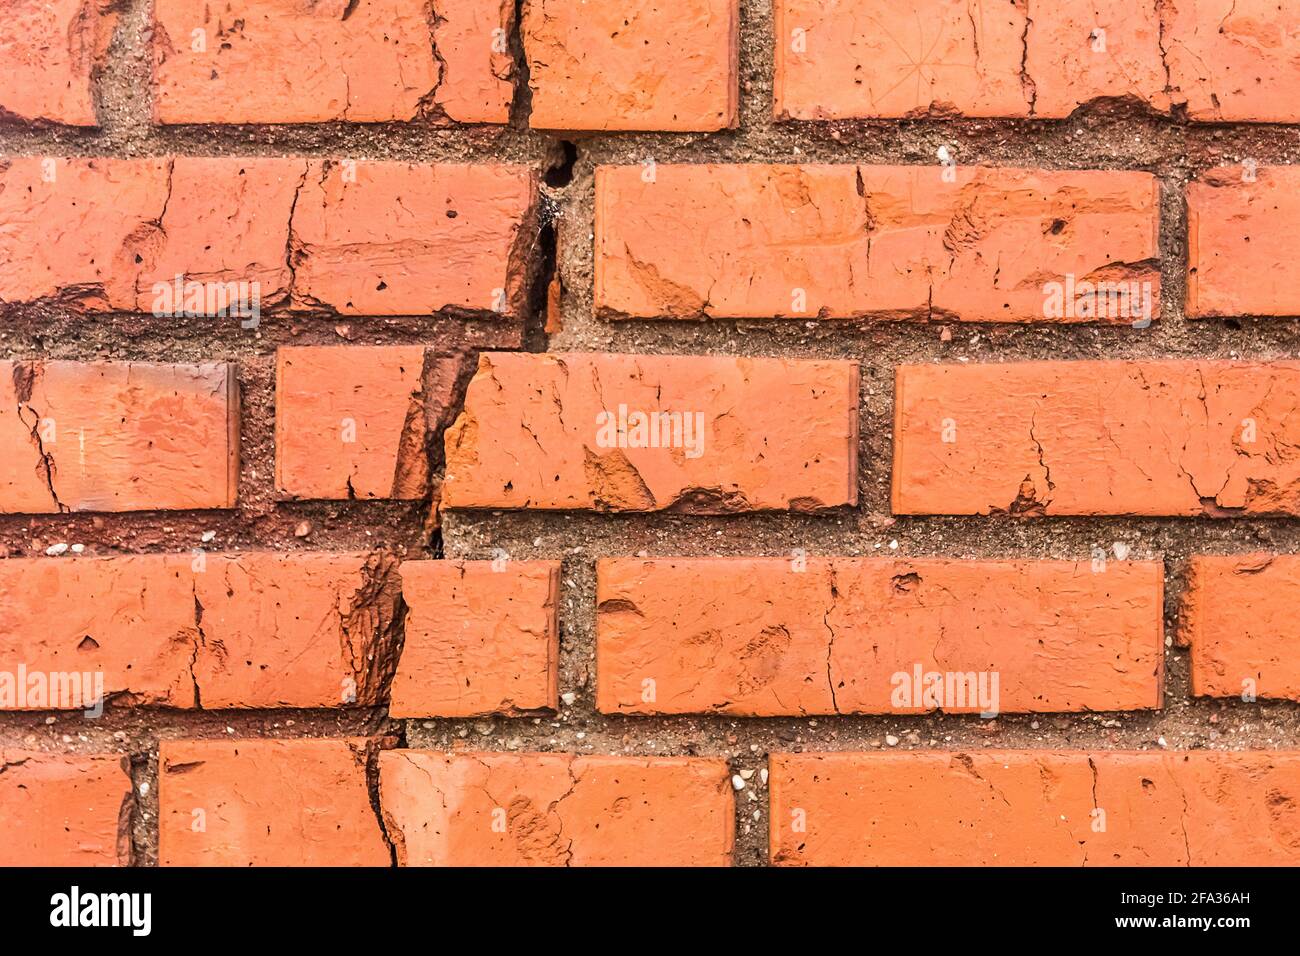 Crack on old brown damaged brick wall broken facade texture background. Stock Photo